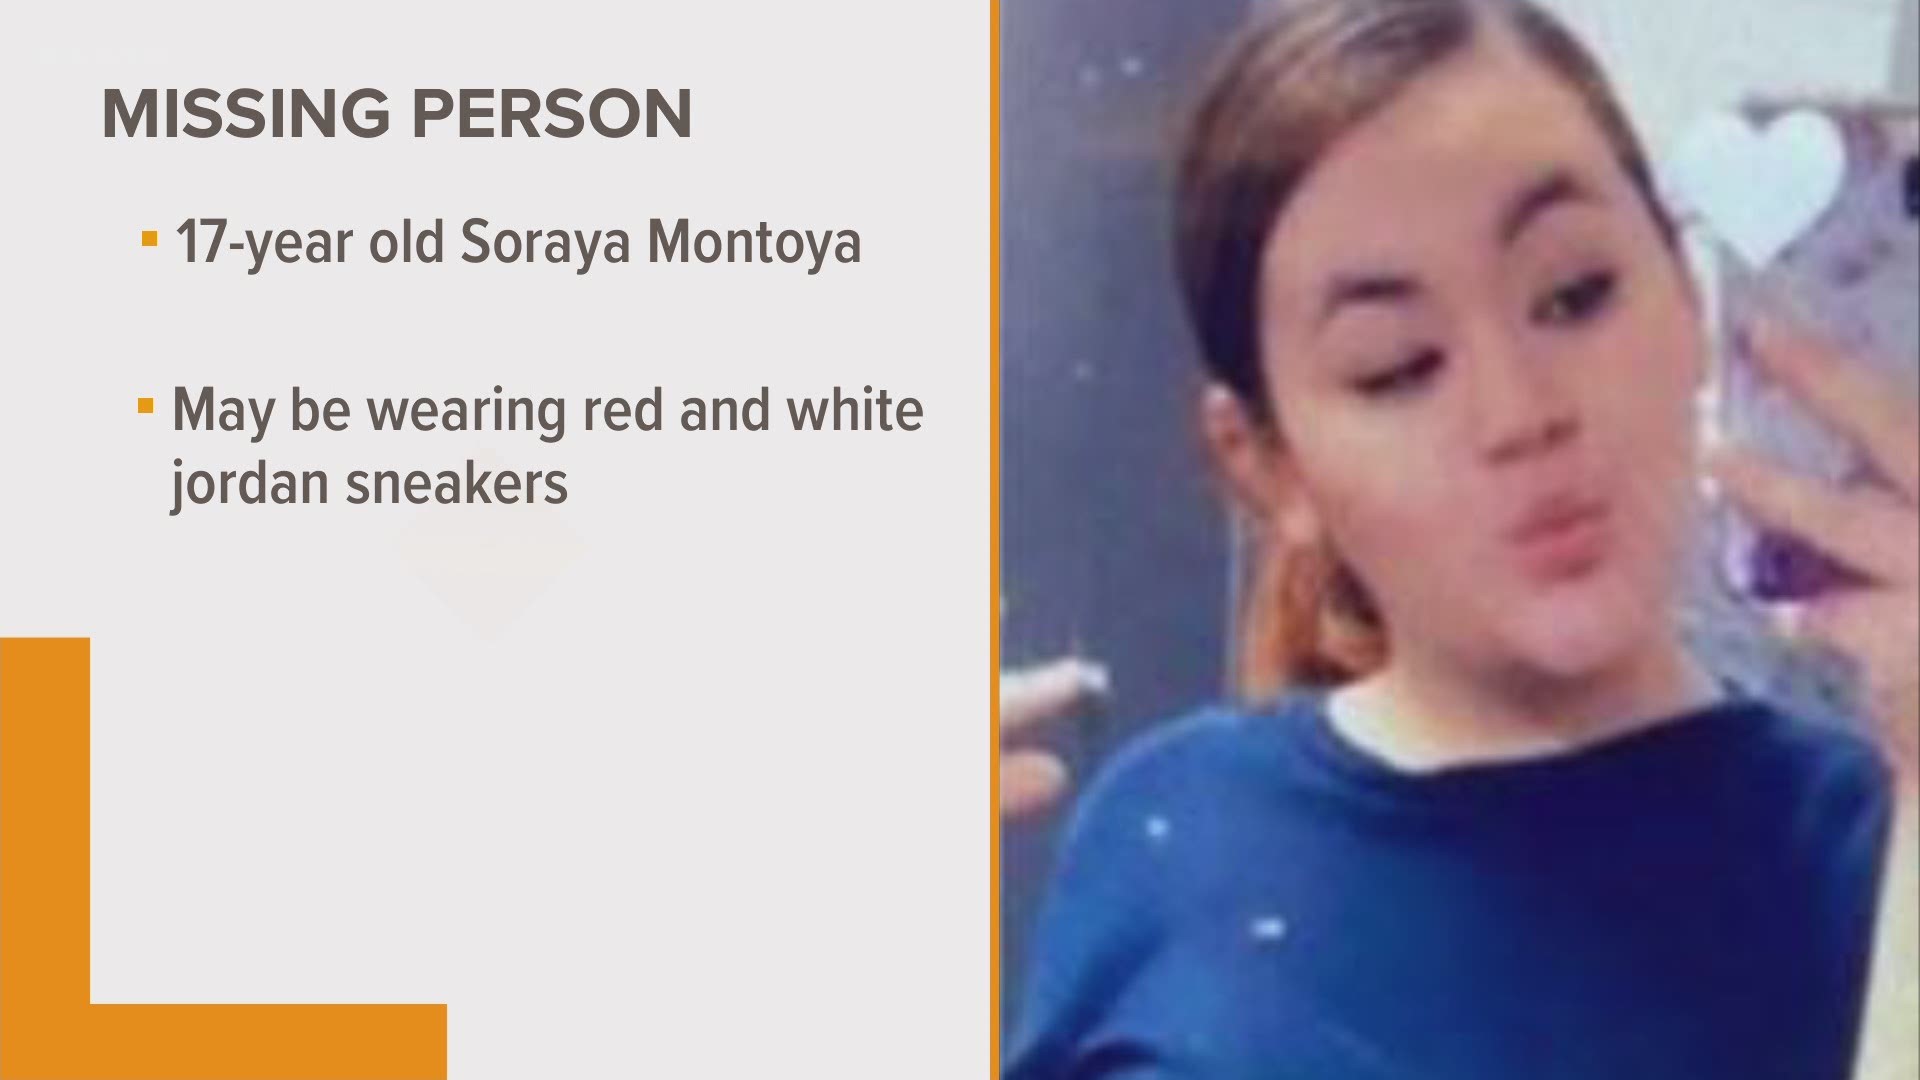 Soraya Montoya, 17, was last seen wearing red and white Jordan sneakers and carrying a maroon Jansport backpack.